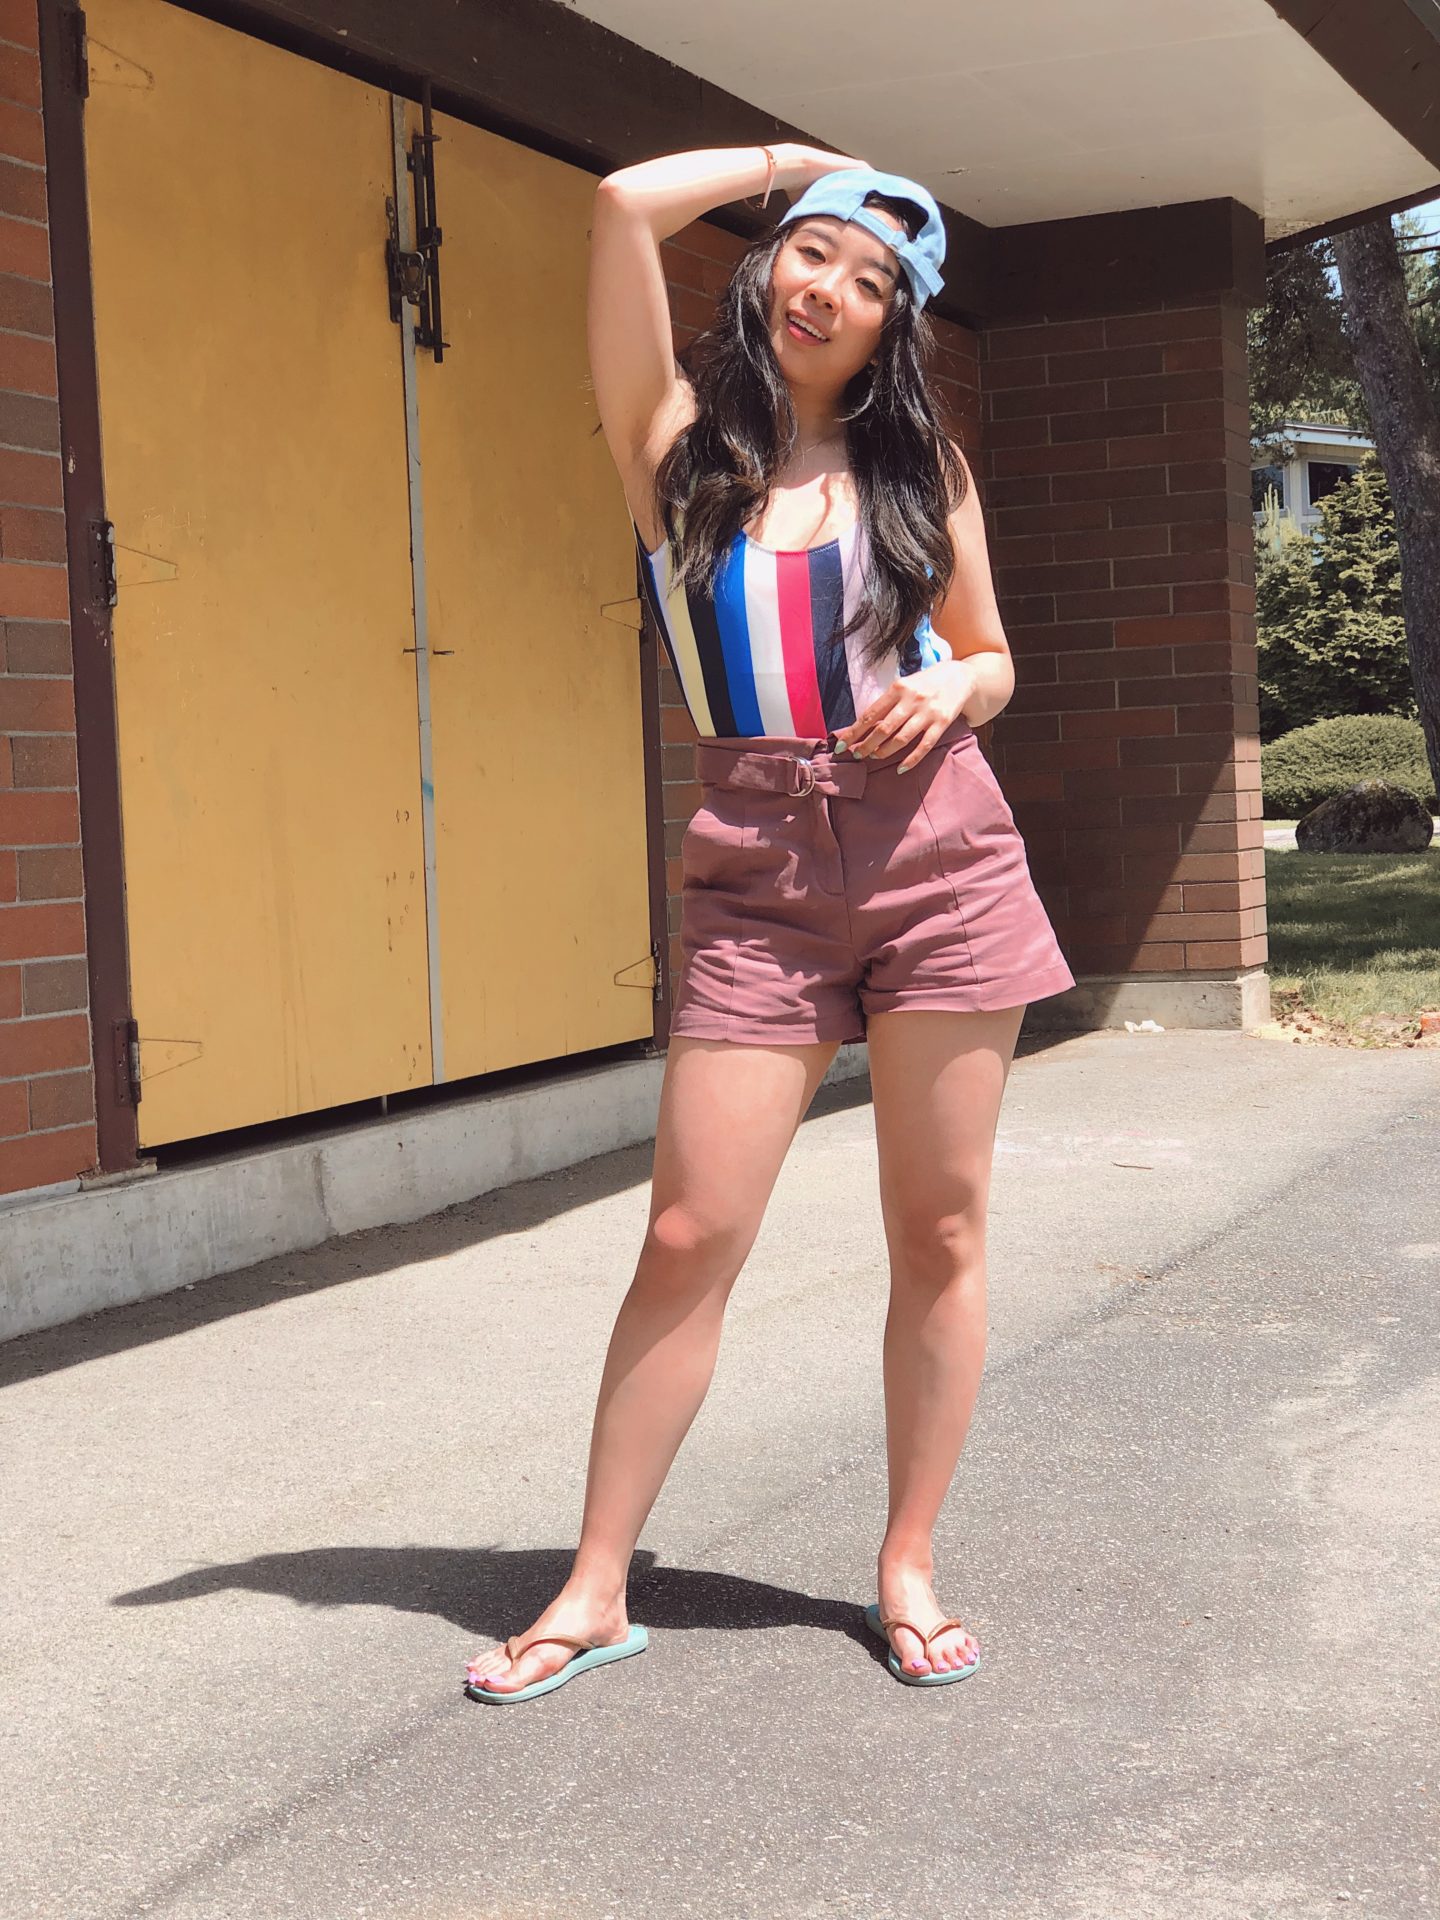 Loving my new favourite summer outfit of blue ball caps and pink shorts 